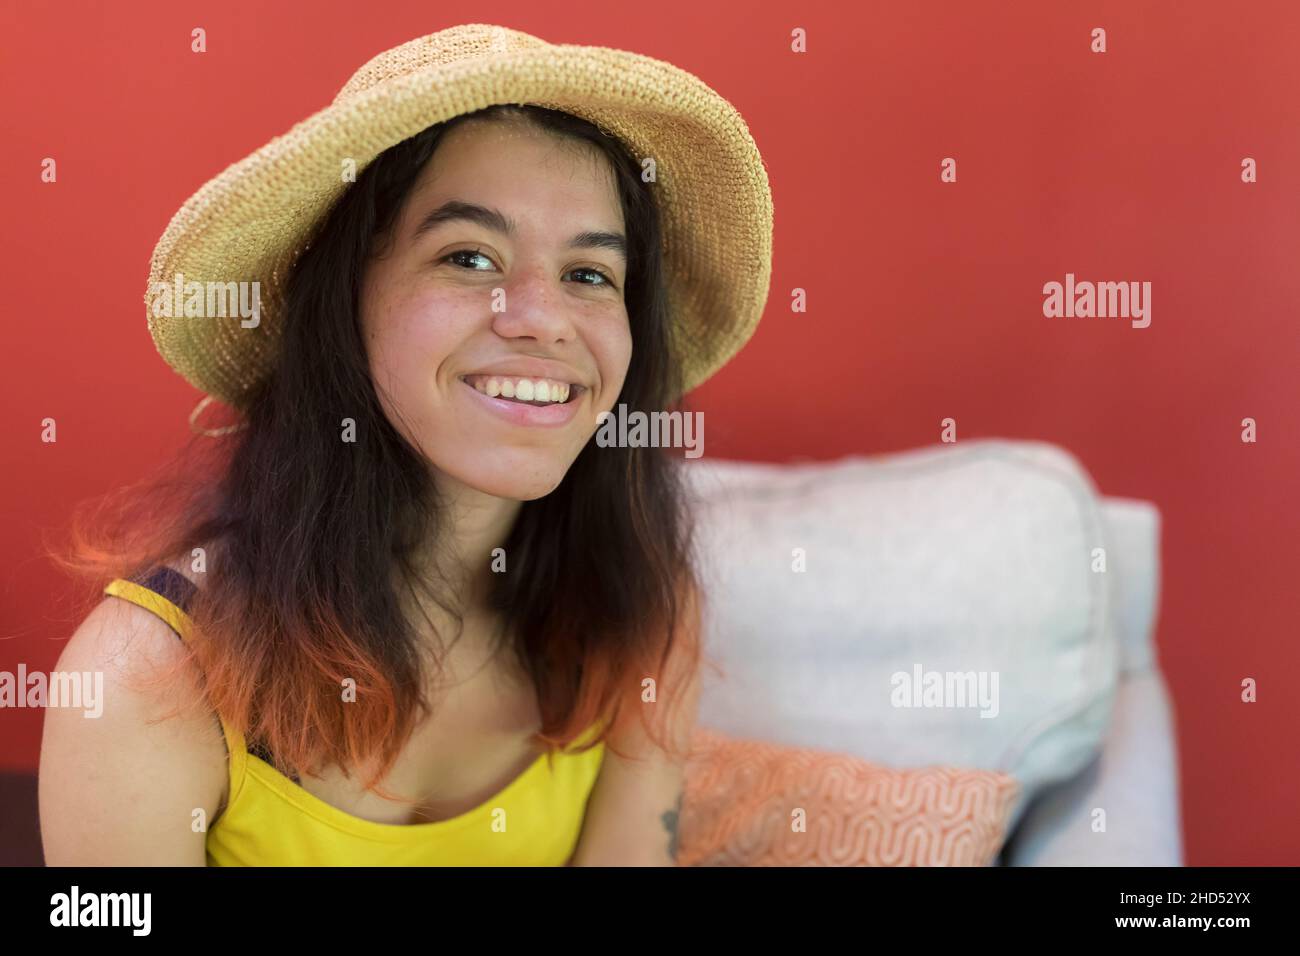 Young smiling woman in straw hat poses for a photo with red background Stock Photo